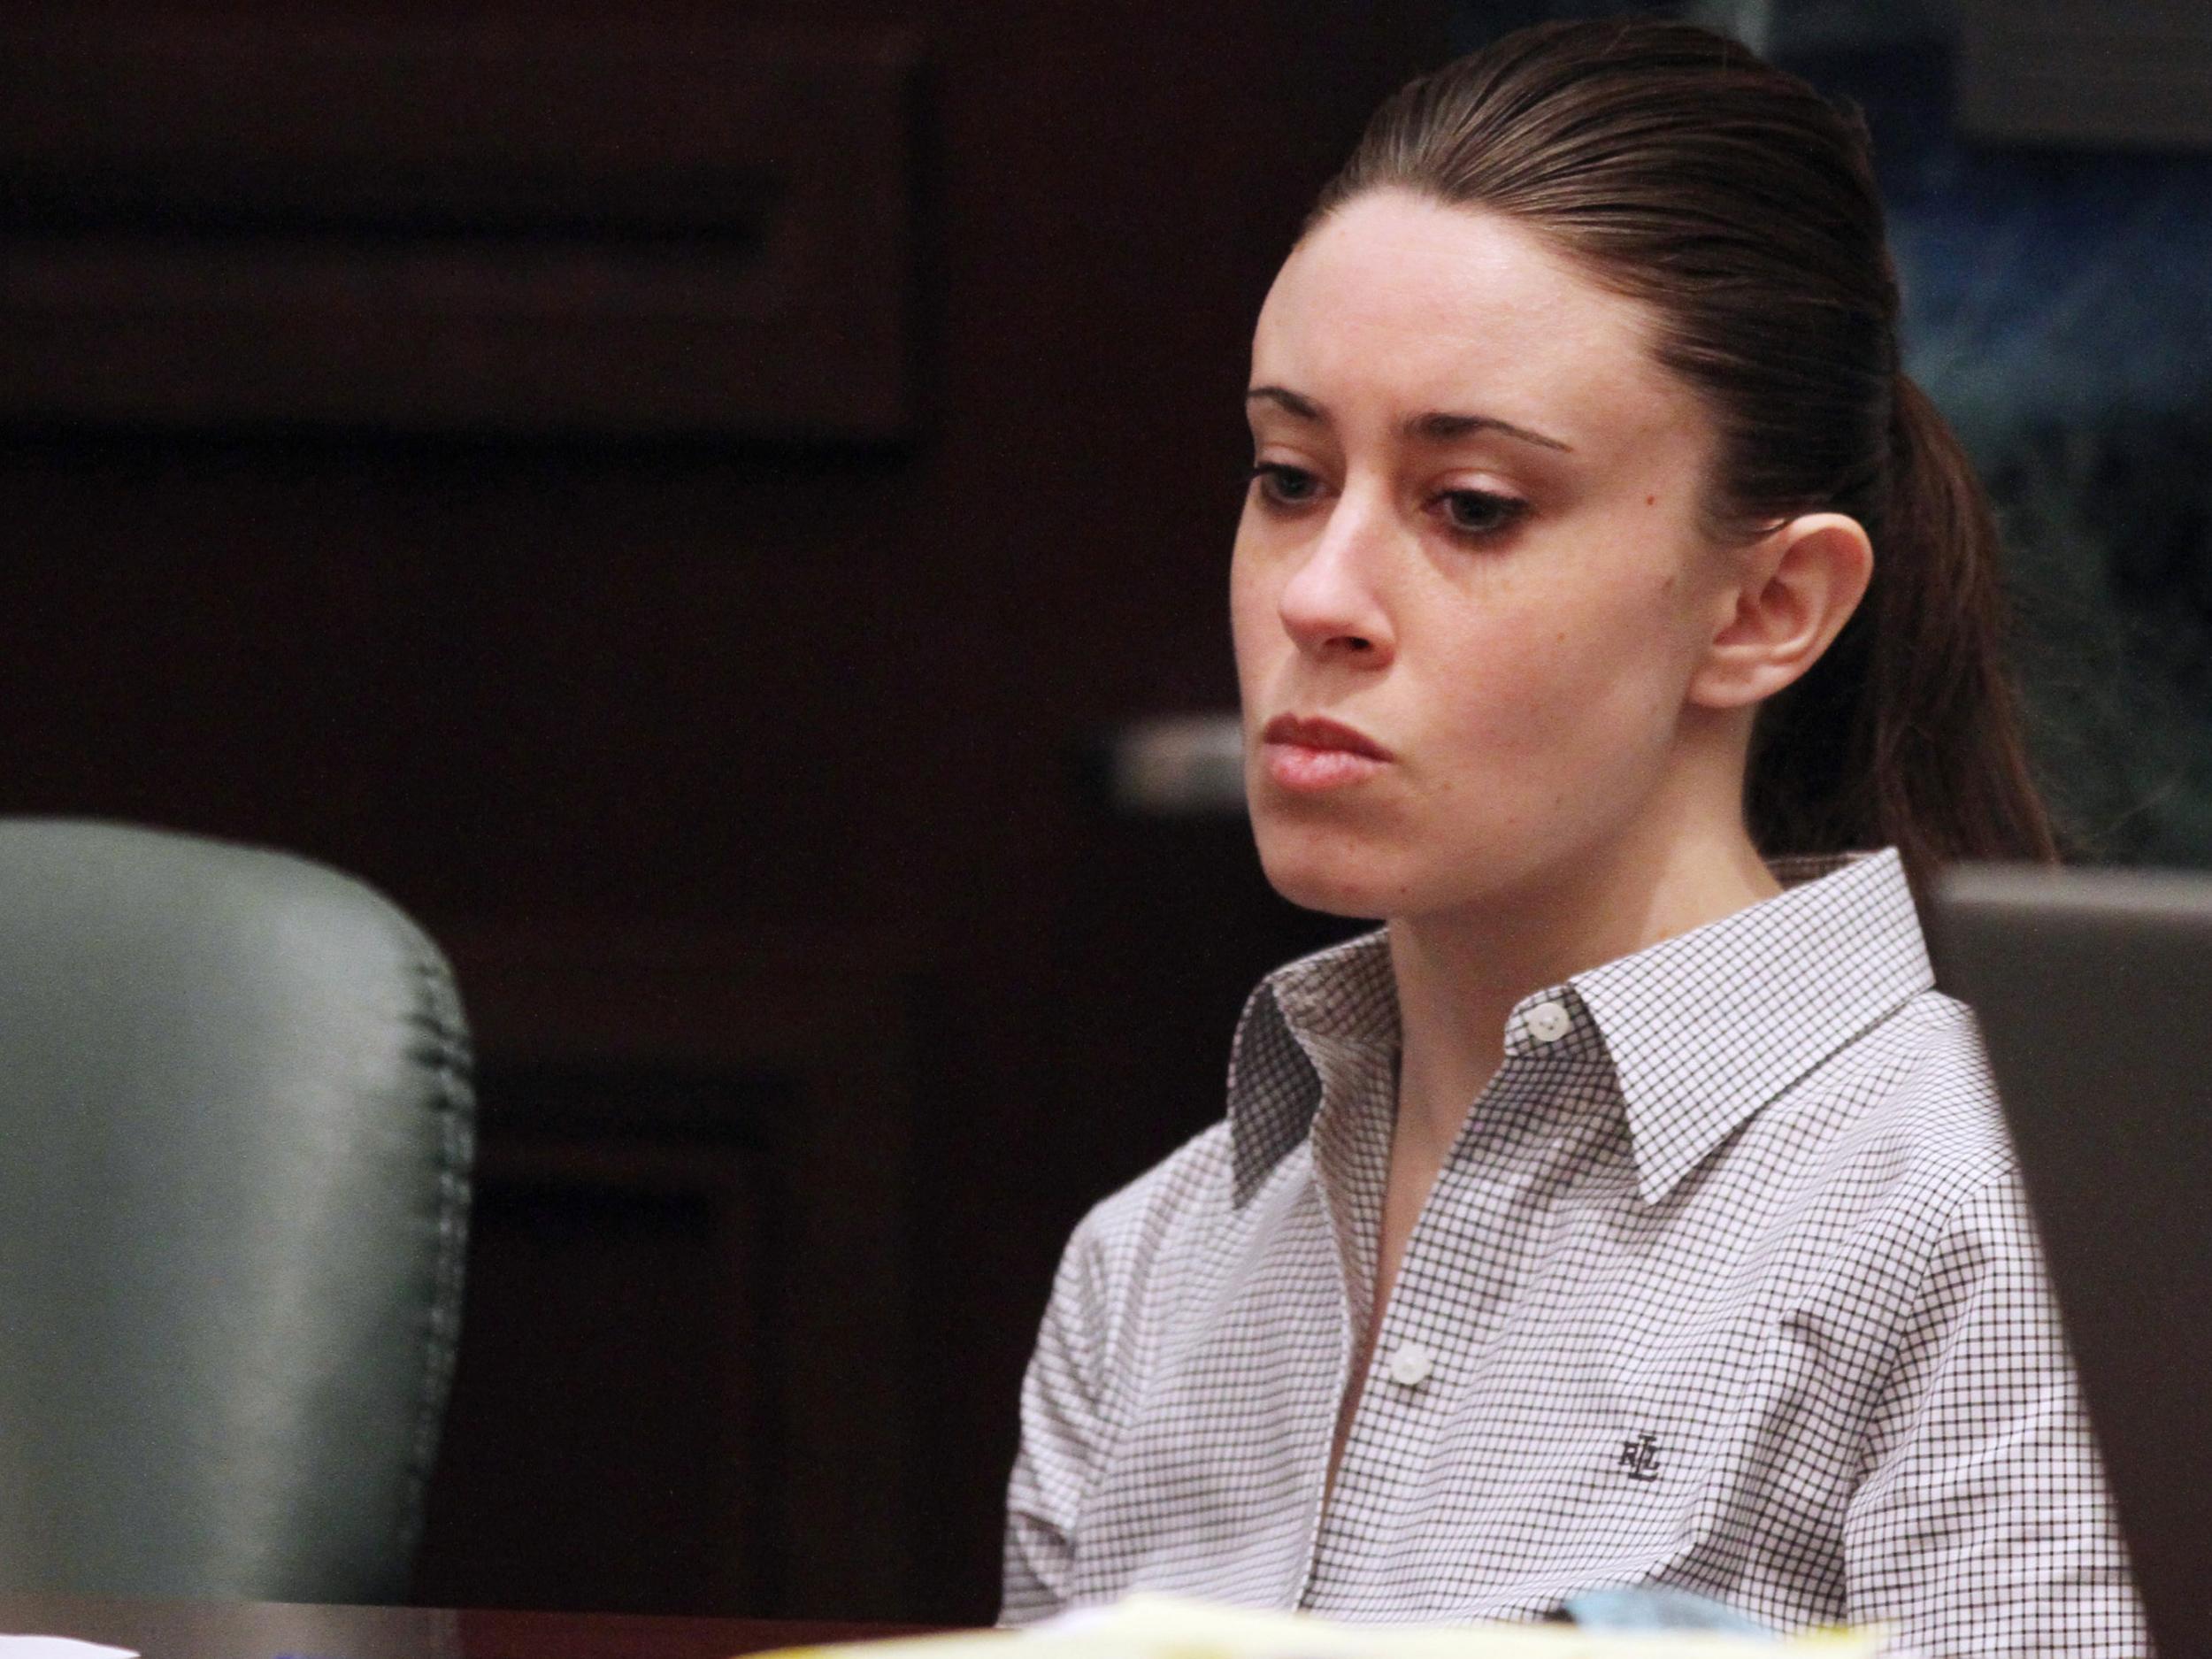 Casey Anthony was cleared of murder, manslaughter and child abuse charges